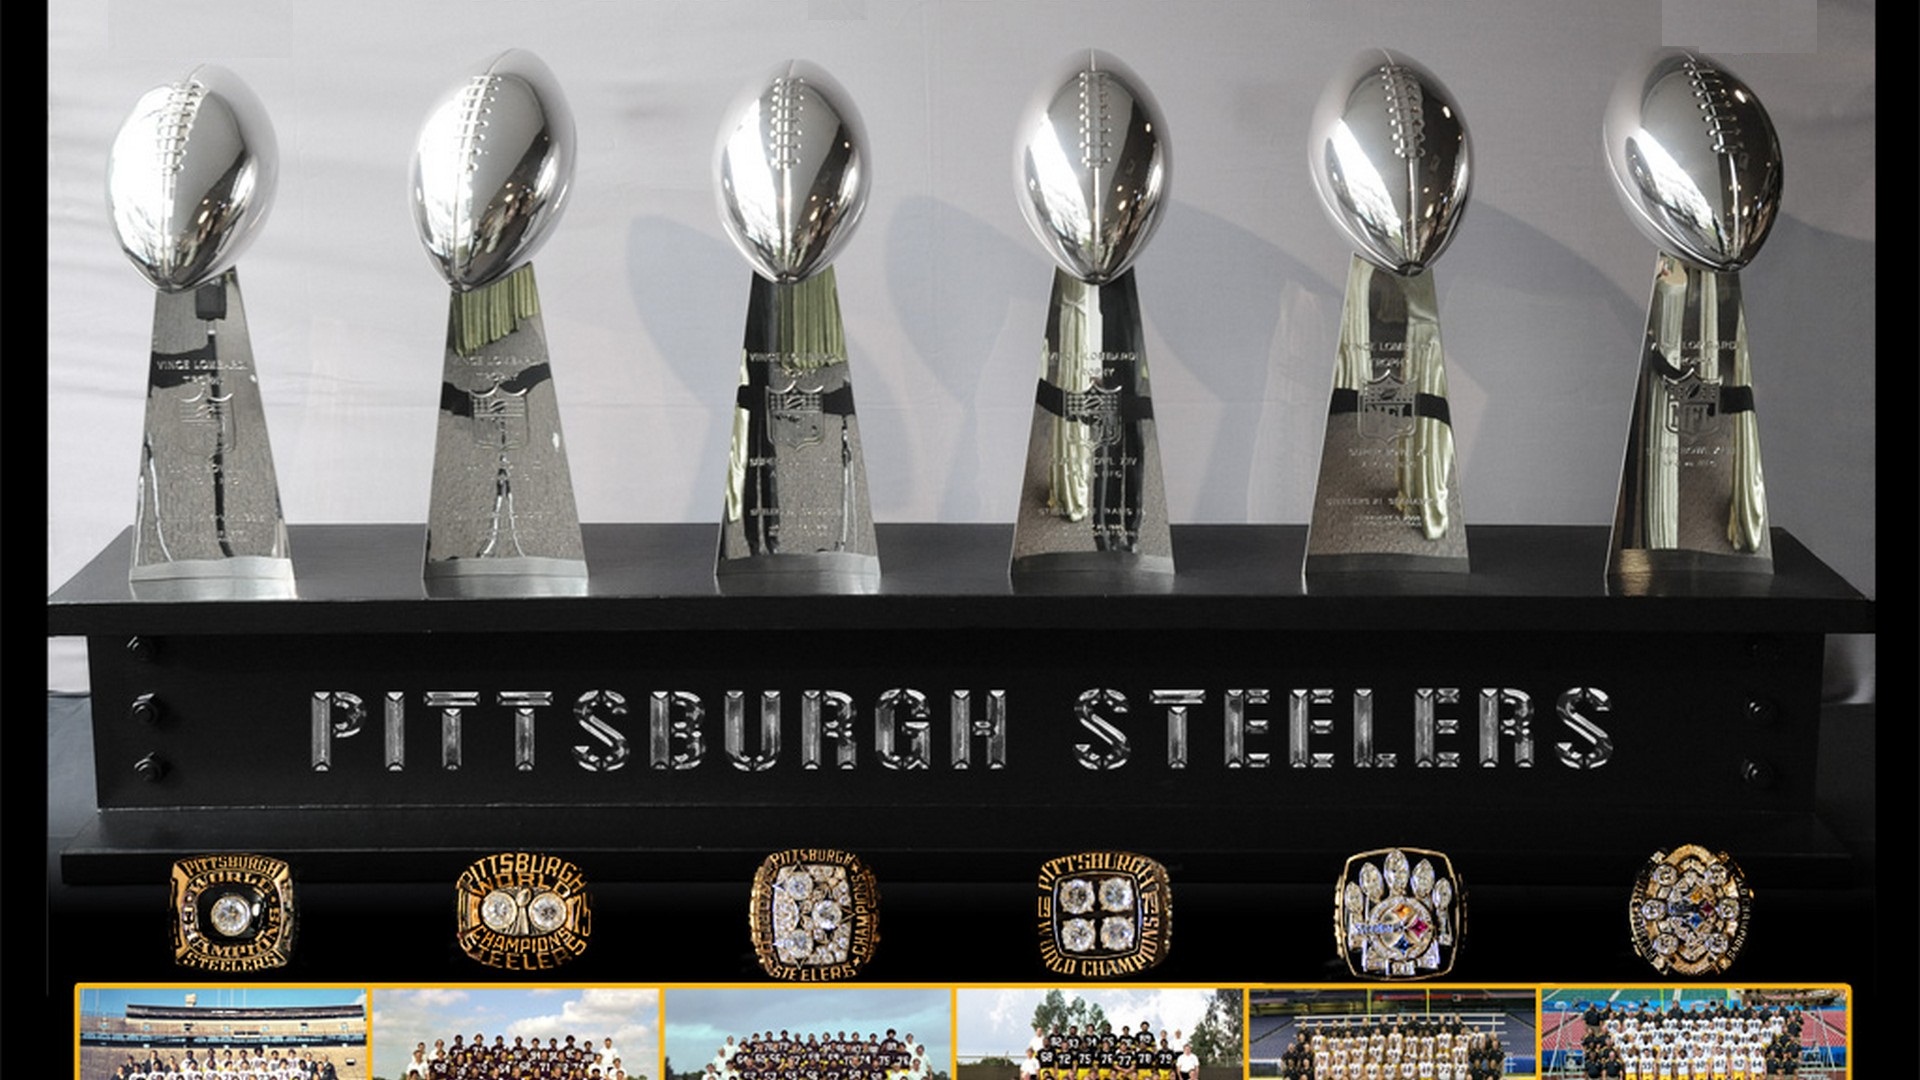 HD NFL Steelers Backgrounds with resolution 1920x1080 pixel. You can make this wallpaper for your Mac or Windows Desktop Background, iPhone, Android or Tablet and another Smartphone device